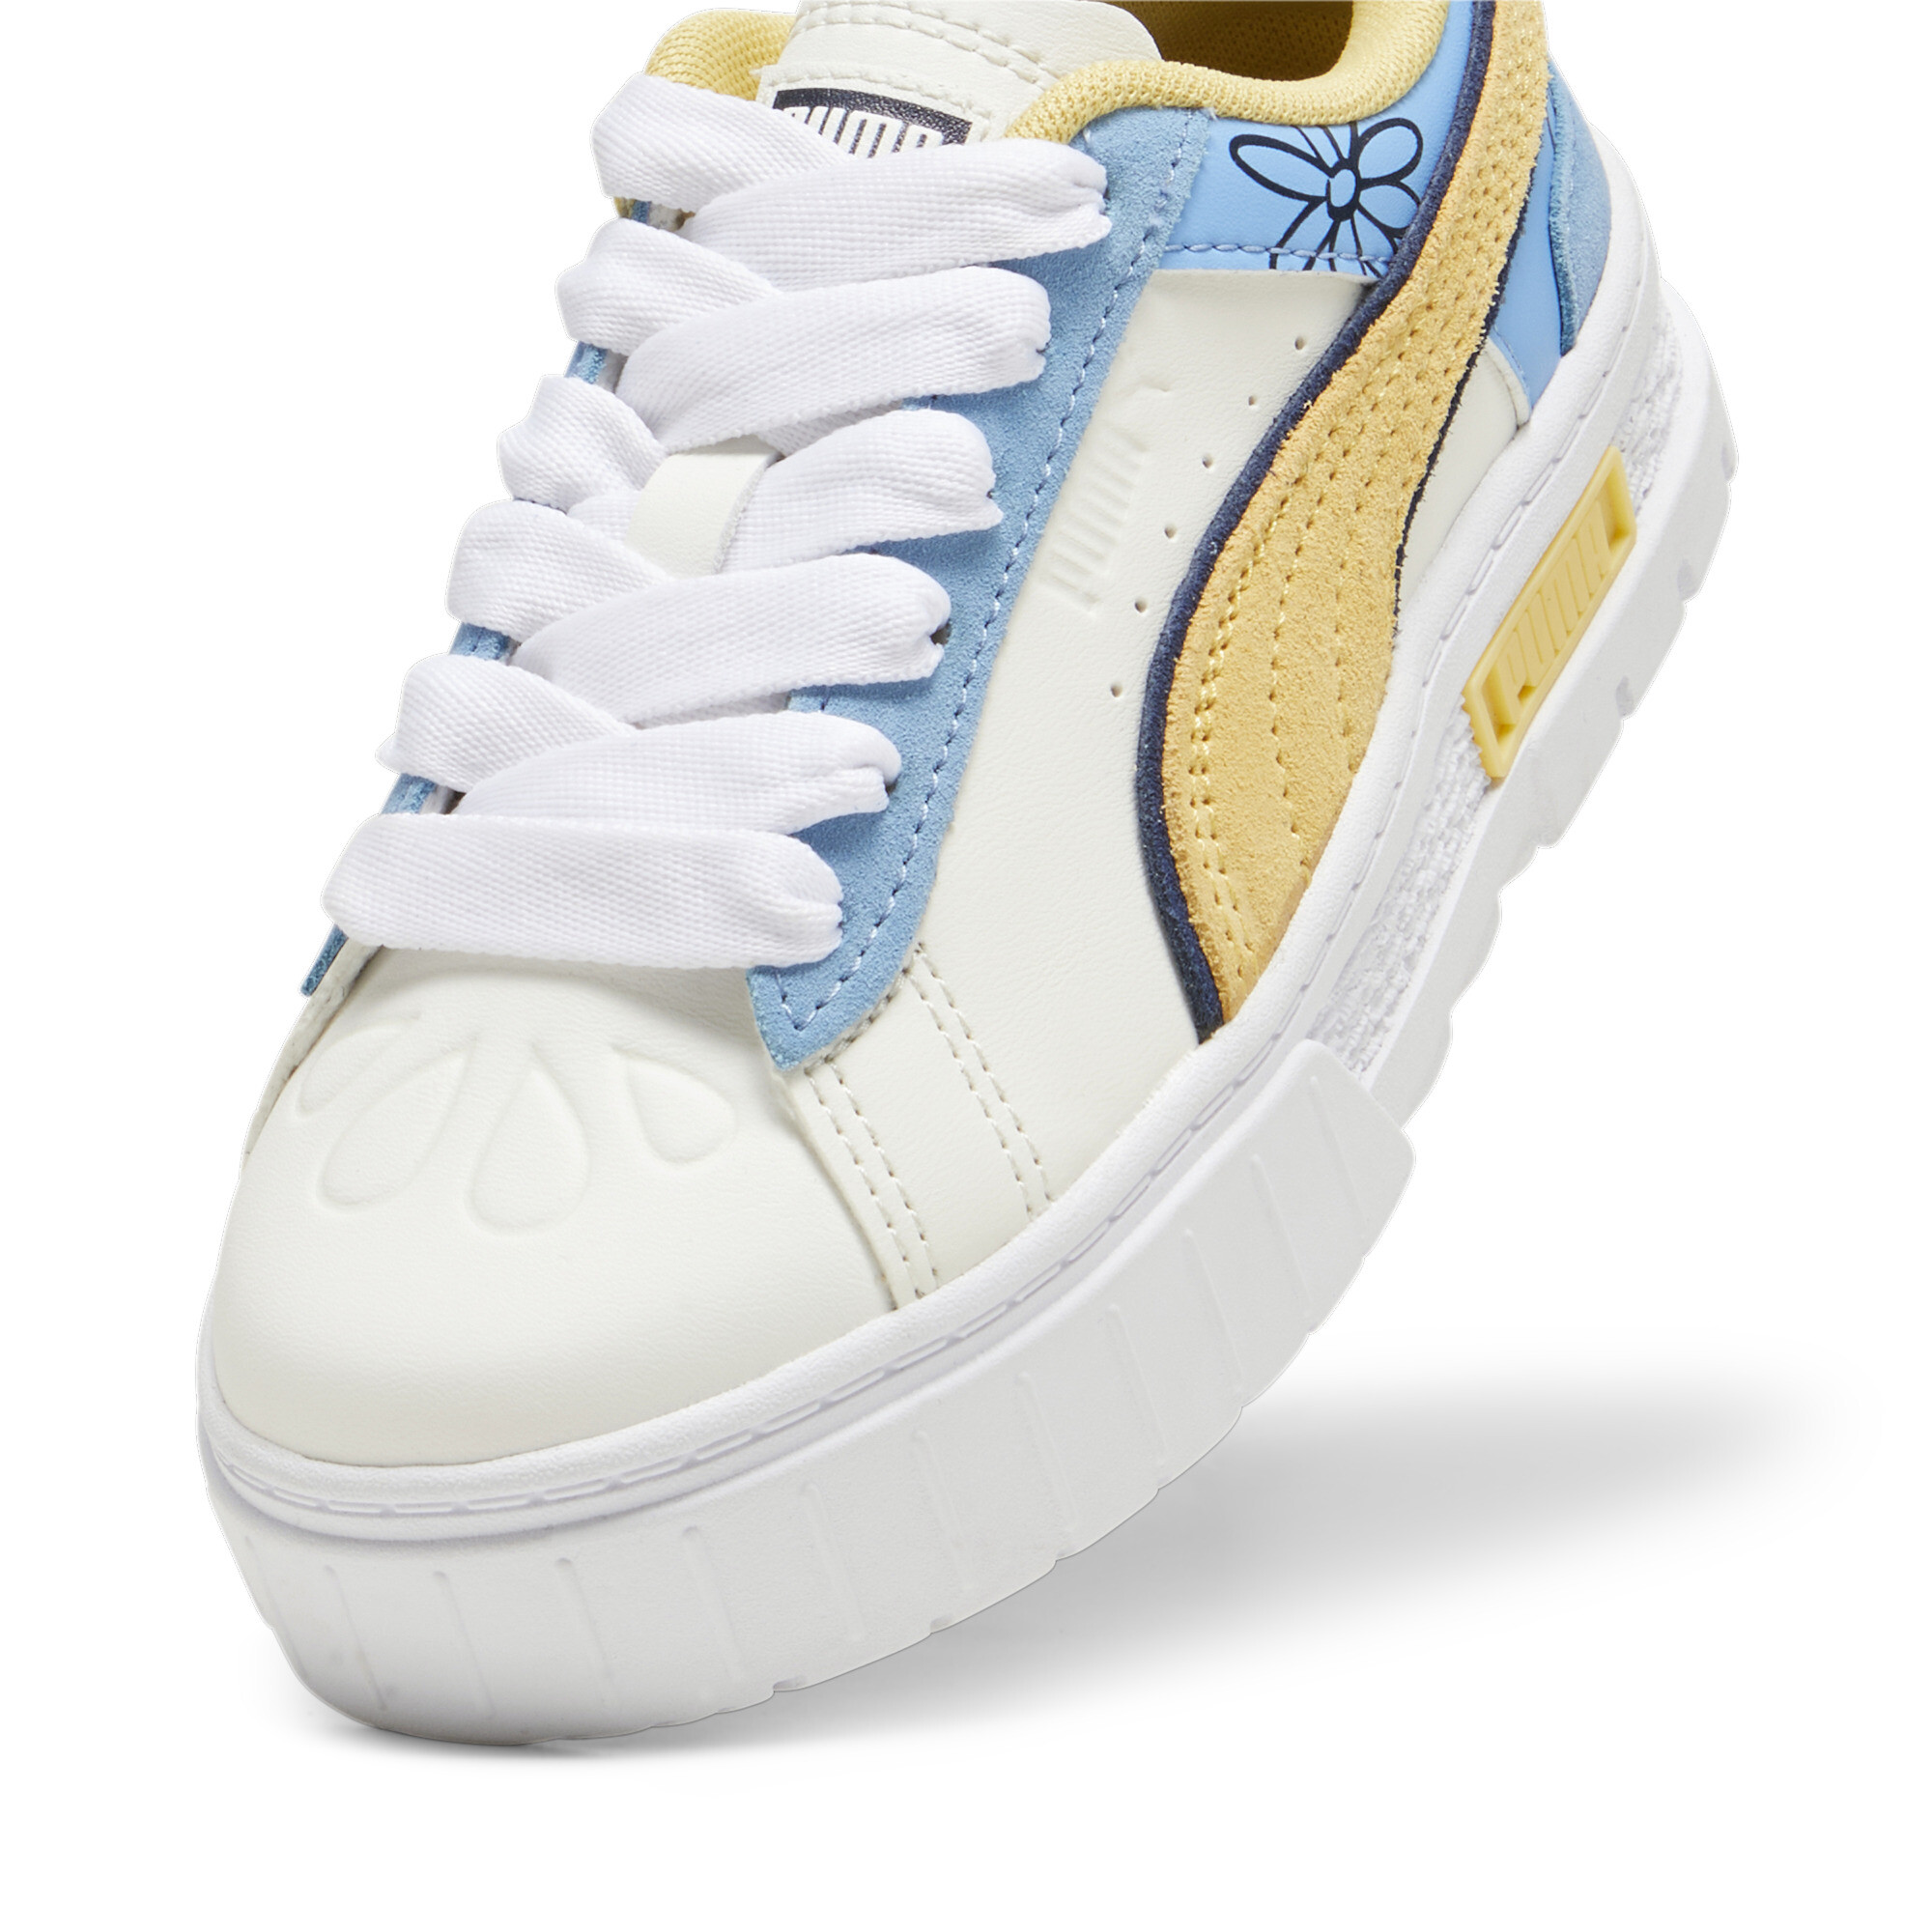 Puma X THE SMURFS Mayze Kids' Sneakers, White, Size 34.5, Shoes